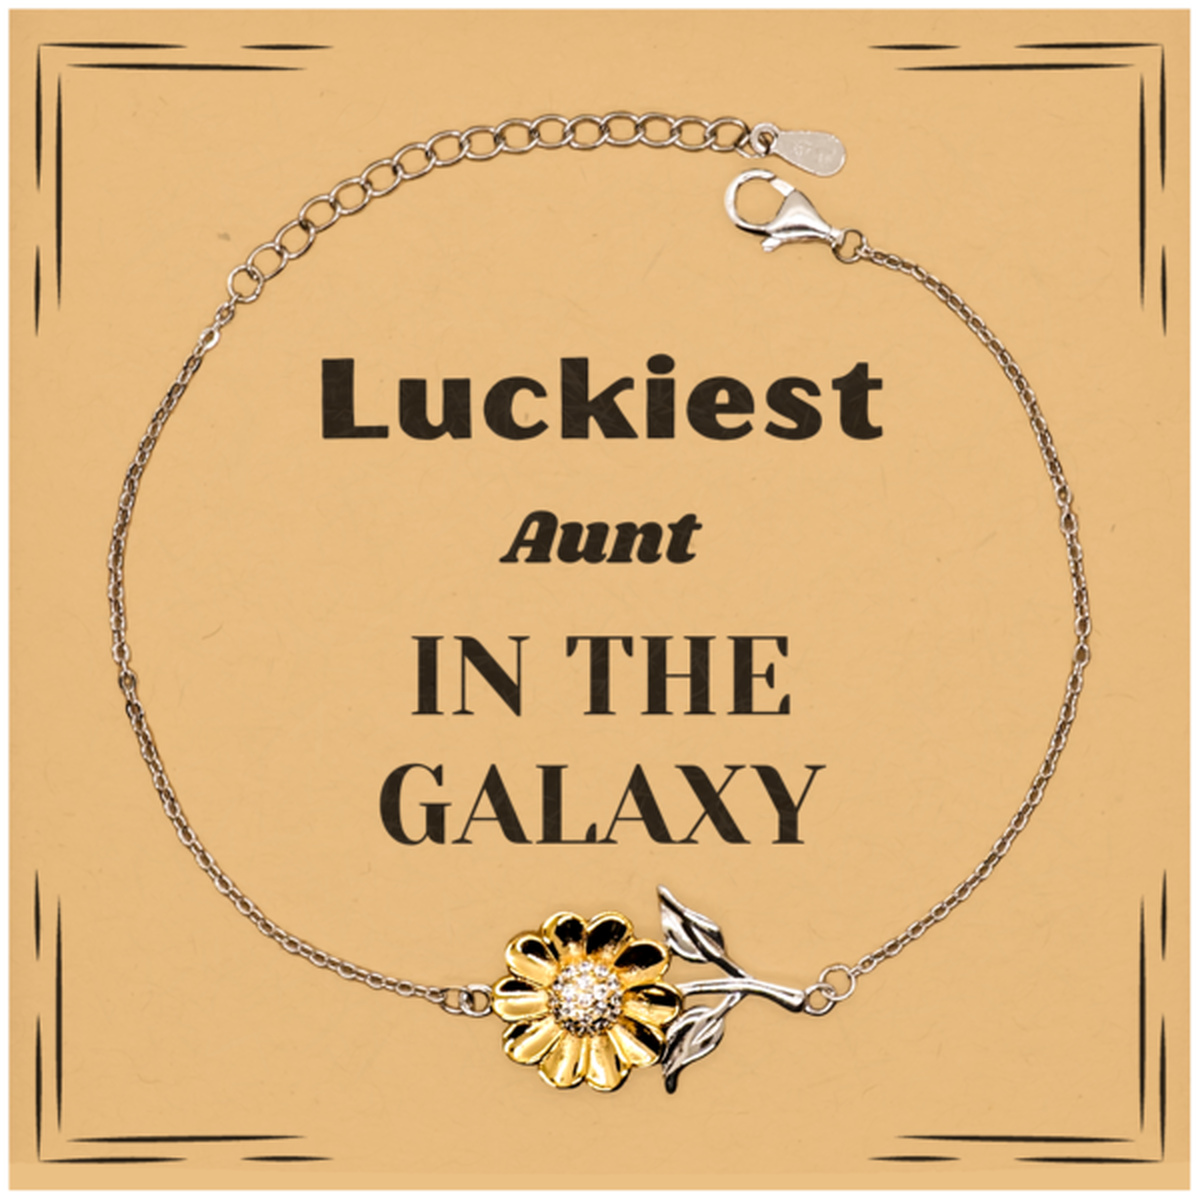 Luckiest Aunt in the Galaxy, To My Aunt Message Card Gifts, Christmas Aunt Sunflower Bracelet Gifts, X-mas Birthday Unique Gifts For Aunt Men Women